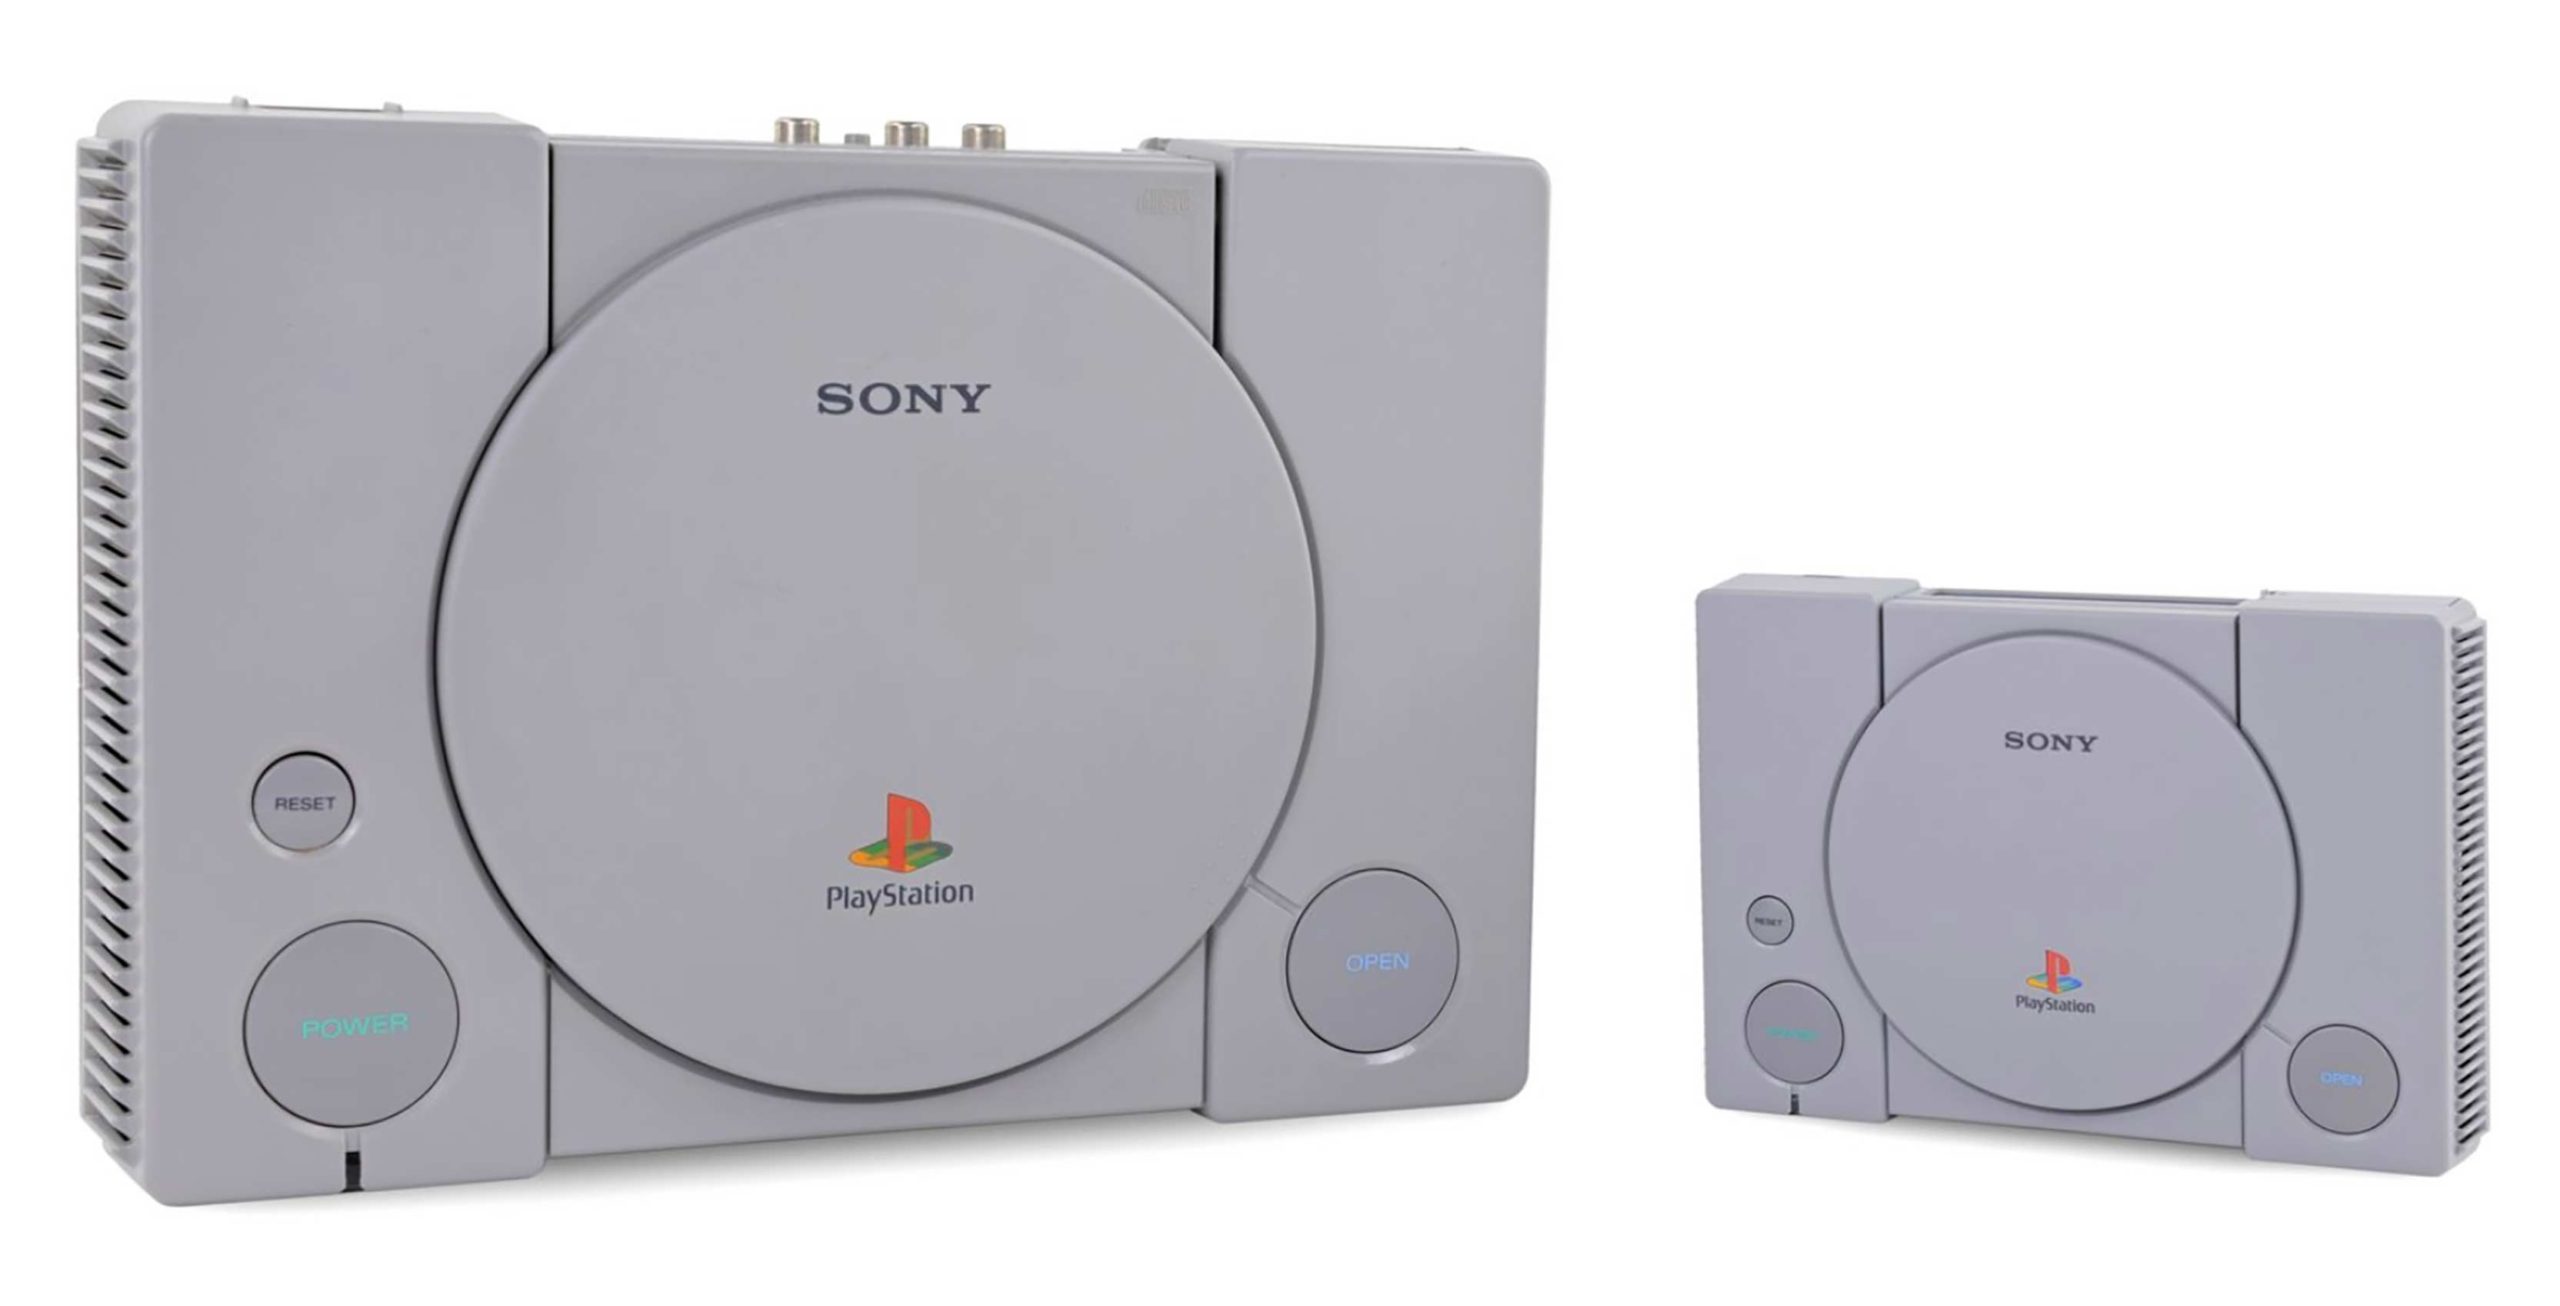 You've forgotten your PlayStation 1, but federal inmates haven't